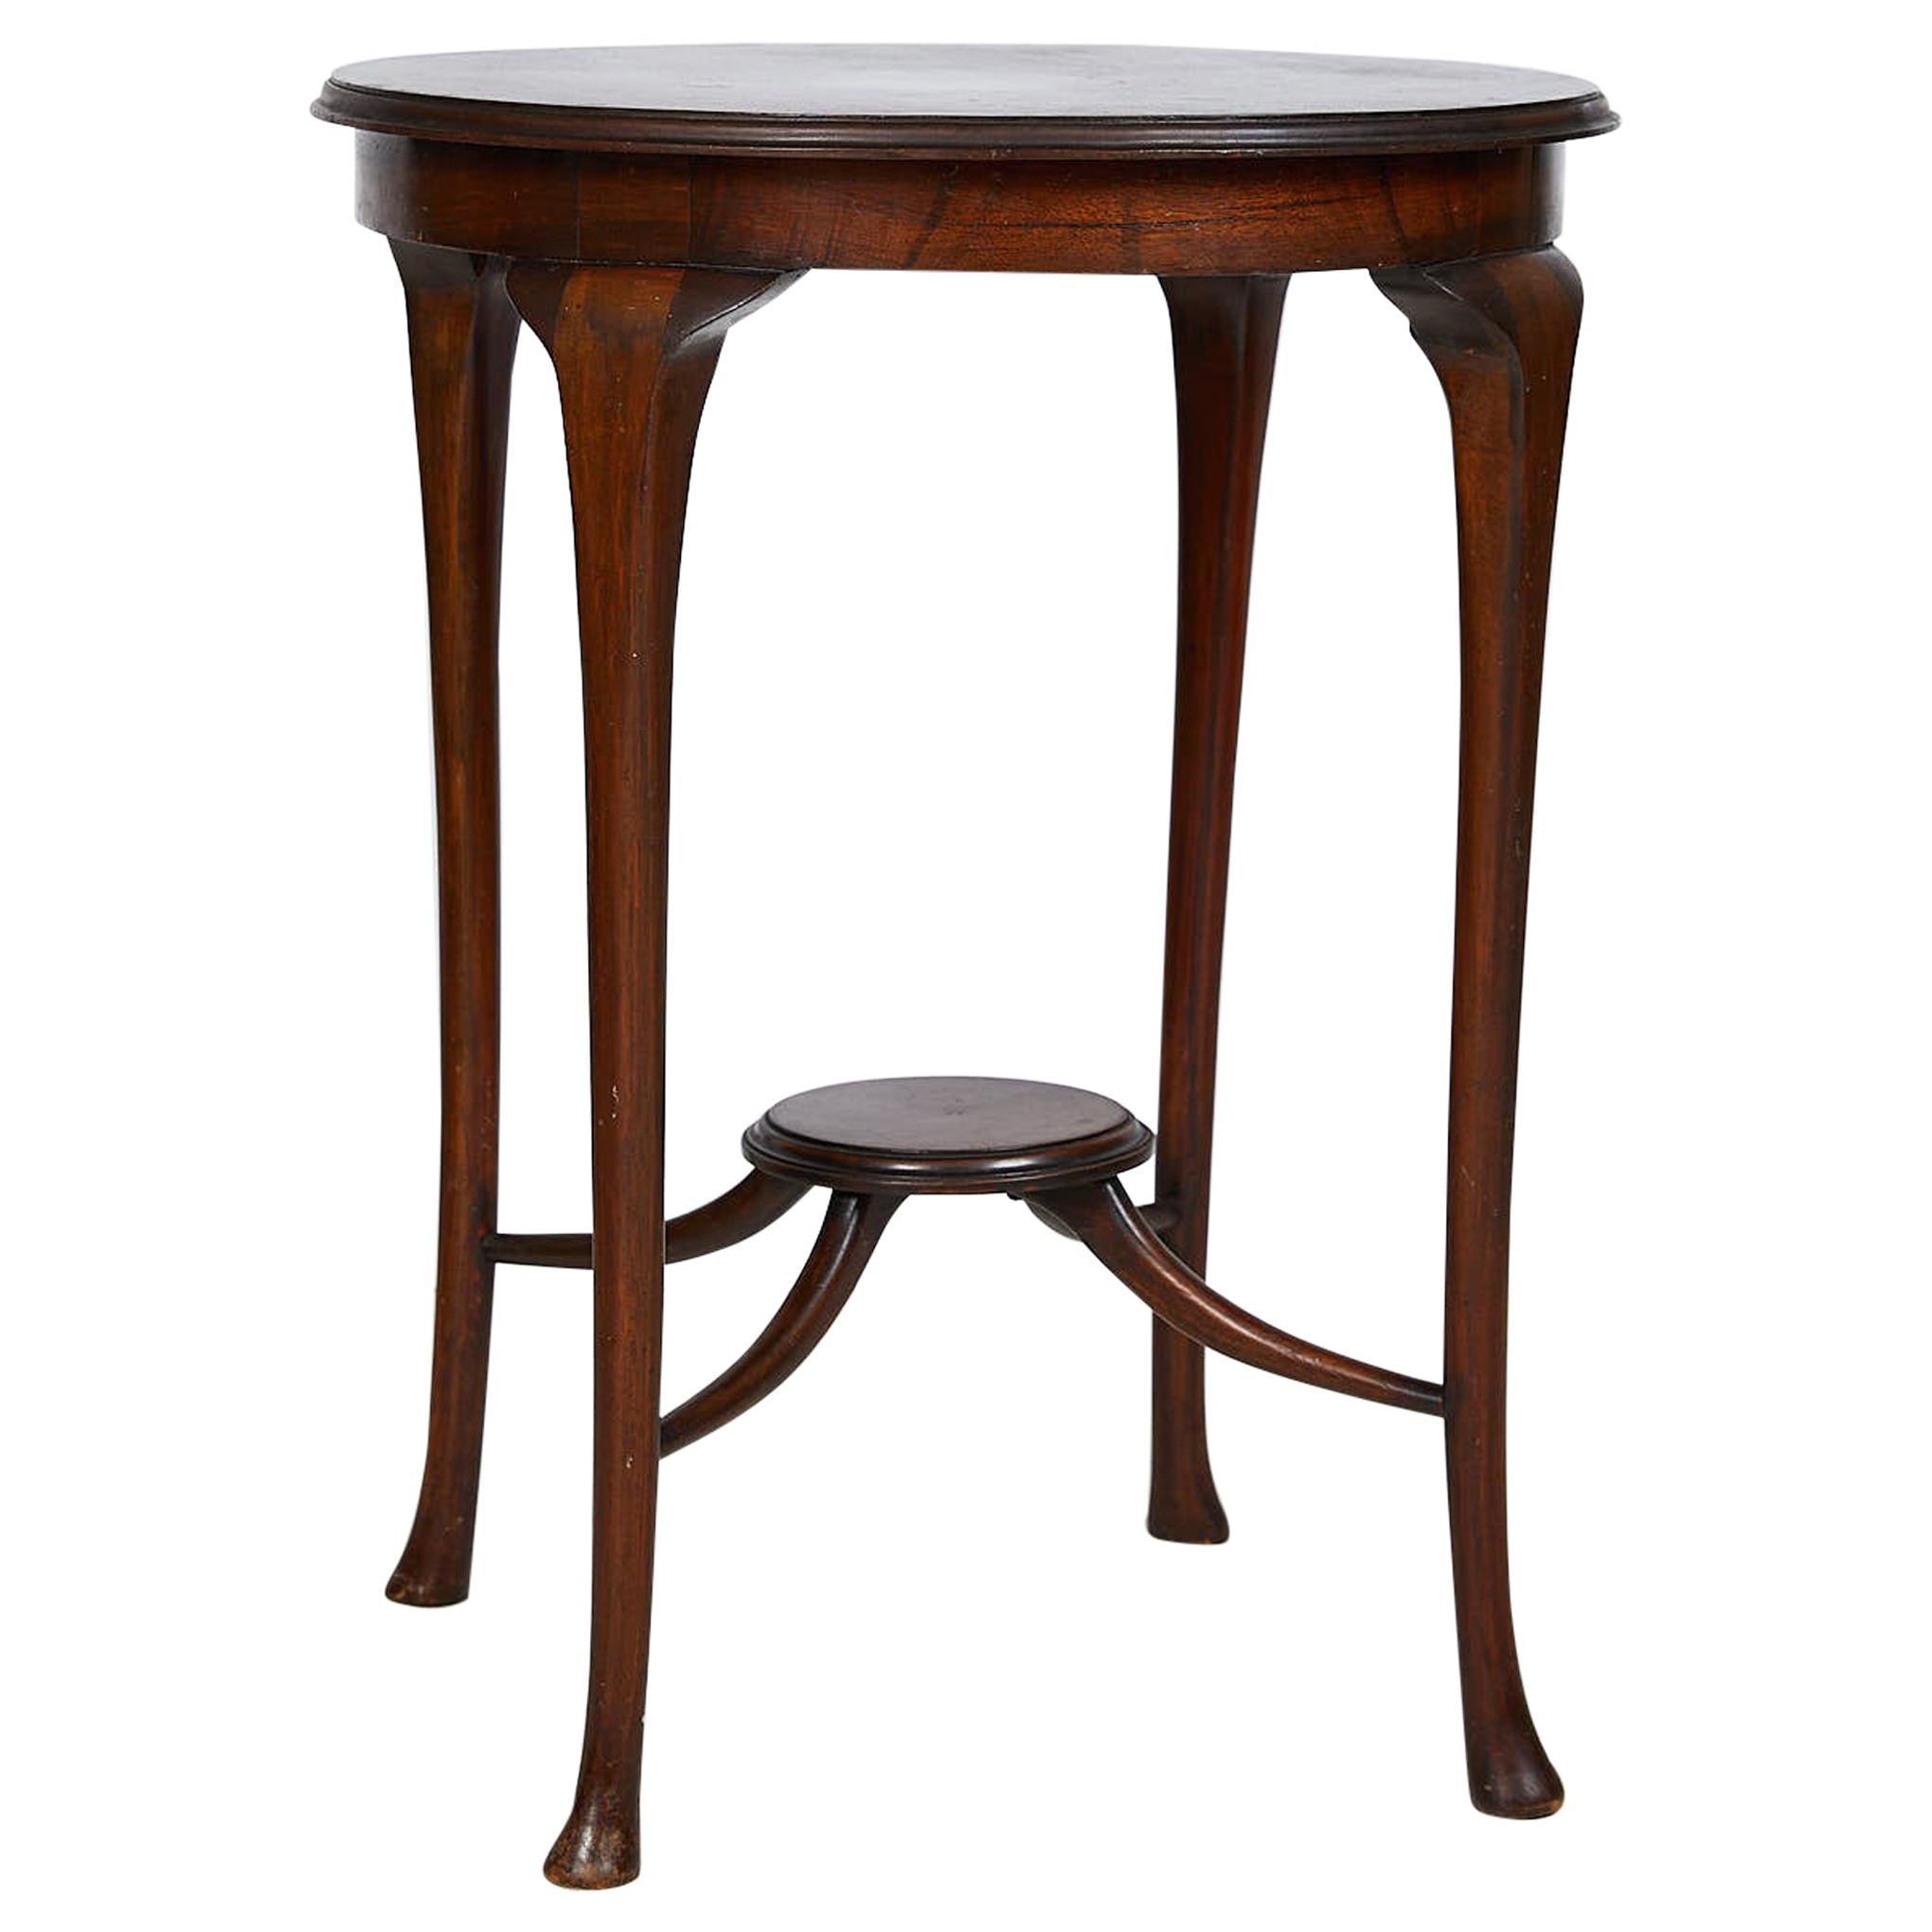 Early 20th century elegant English tea or side table made of mahogany during the Art Nouveau period. The upper surface, round in shape, has been edged with a delicate and refined molding. There is a second comfortable support surface, also round, in